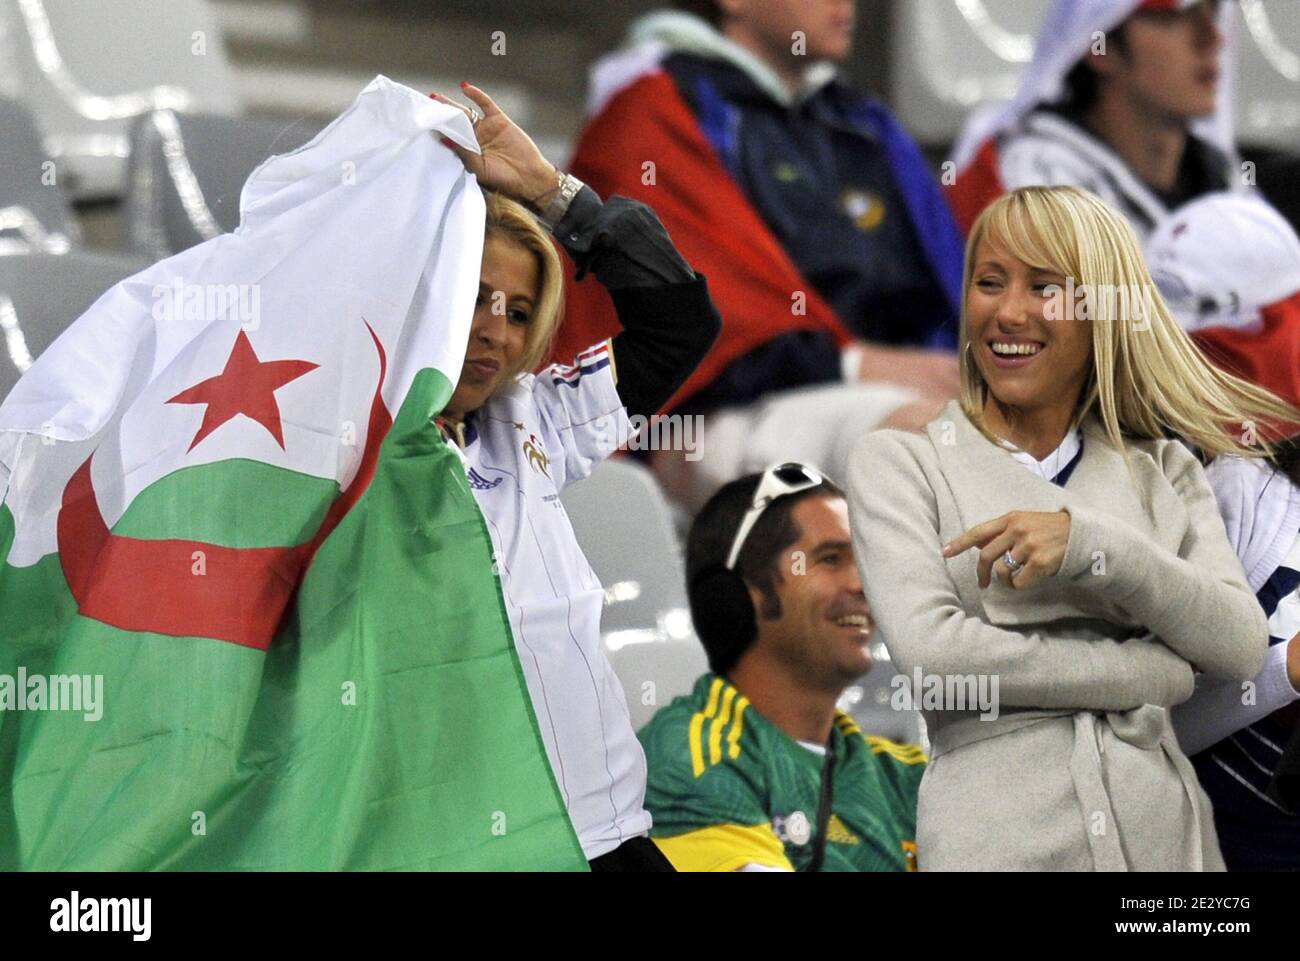 French national football team players' wives, France's striker Franck Ribery's wife Wahiba wears an Algerian flag and France's striker Patrice Evra's wife Sandra during the FIFA World Cup soccer match, France vs Uruguay in Capetown, South Africa, on June 11, 2010. France 0-Uruguay 0. Photo by Christophe Guibbaud/Cameleon/ABACAPRESS.COM Stock Photo